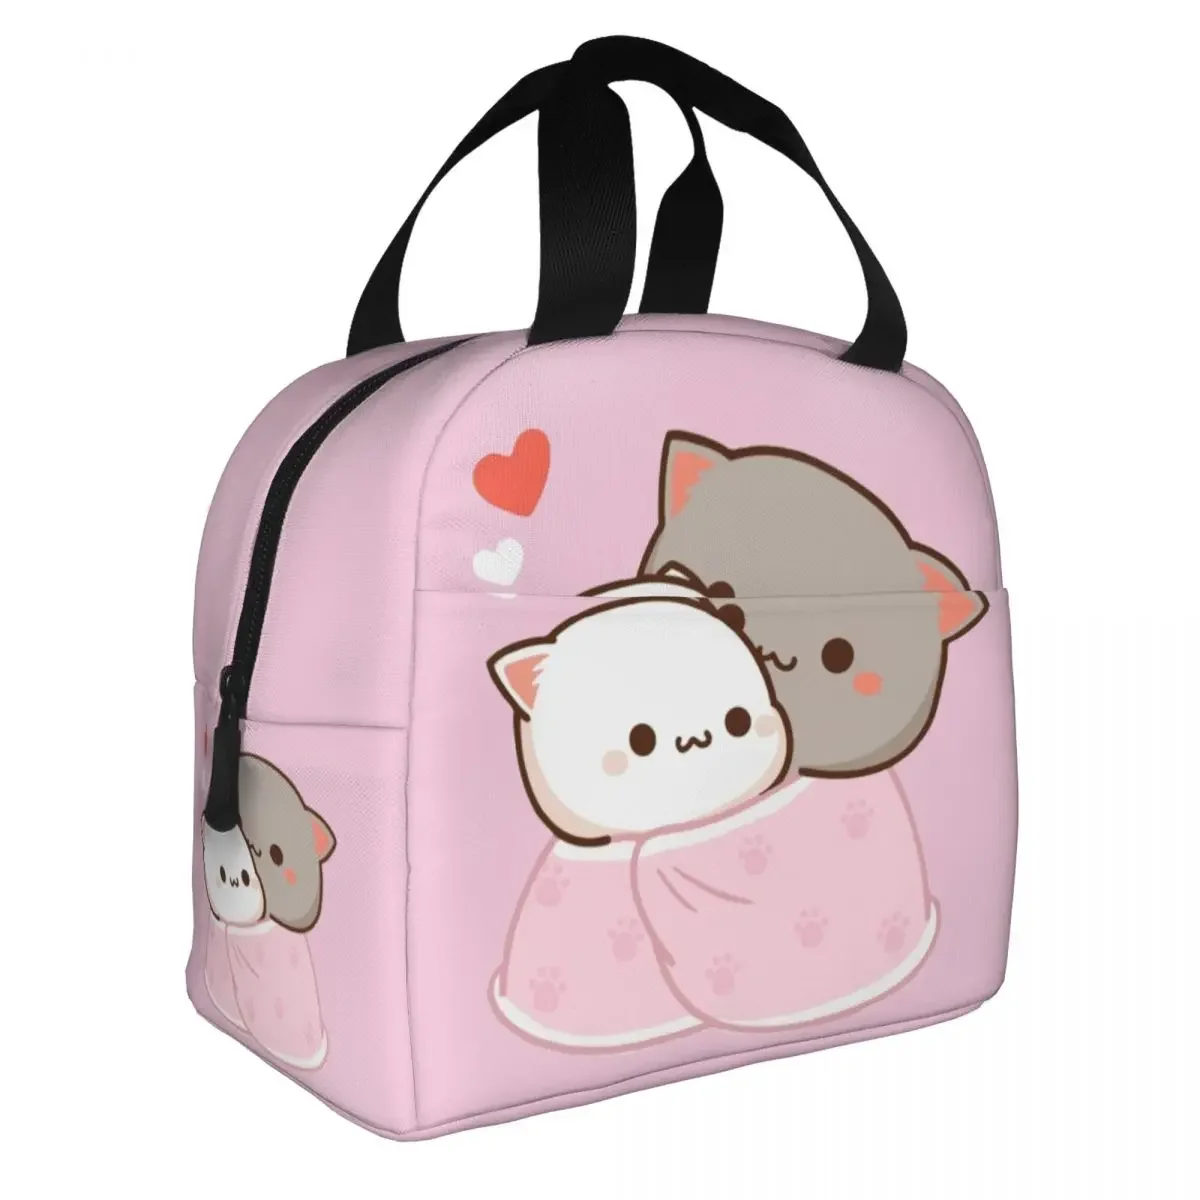 

Cute Peach And Goma Cartoon Insulated Lunch Bags Thermal Bag Meal Container Mocha Mochi Peach Cat Lunch Box Tote Food Handbags